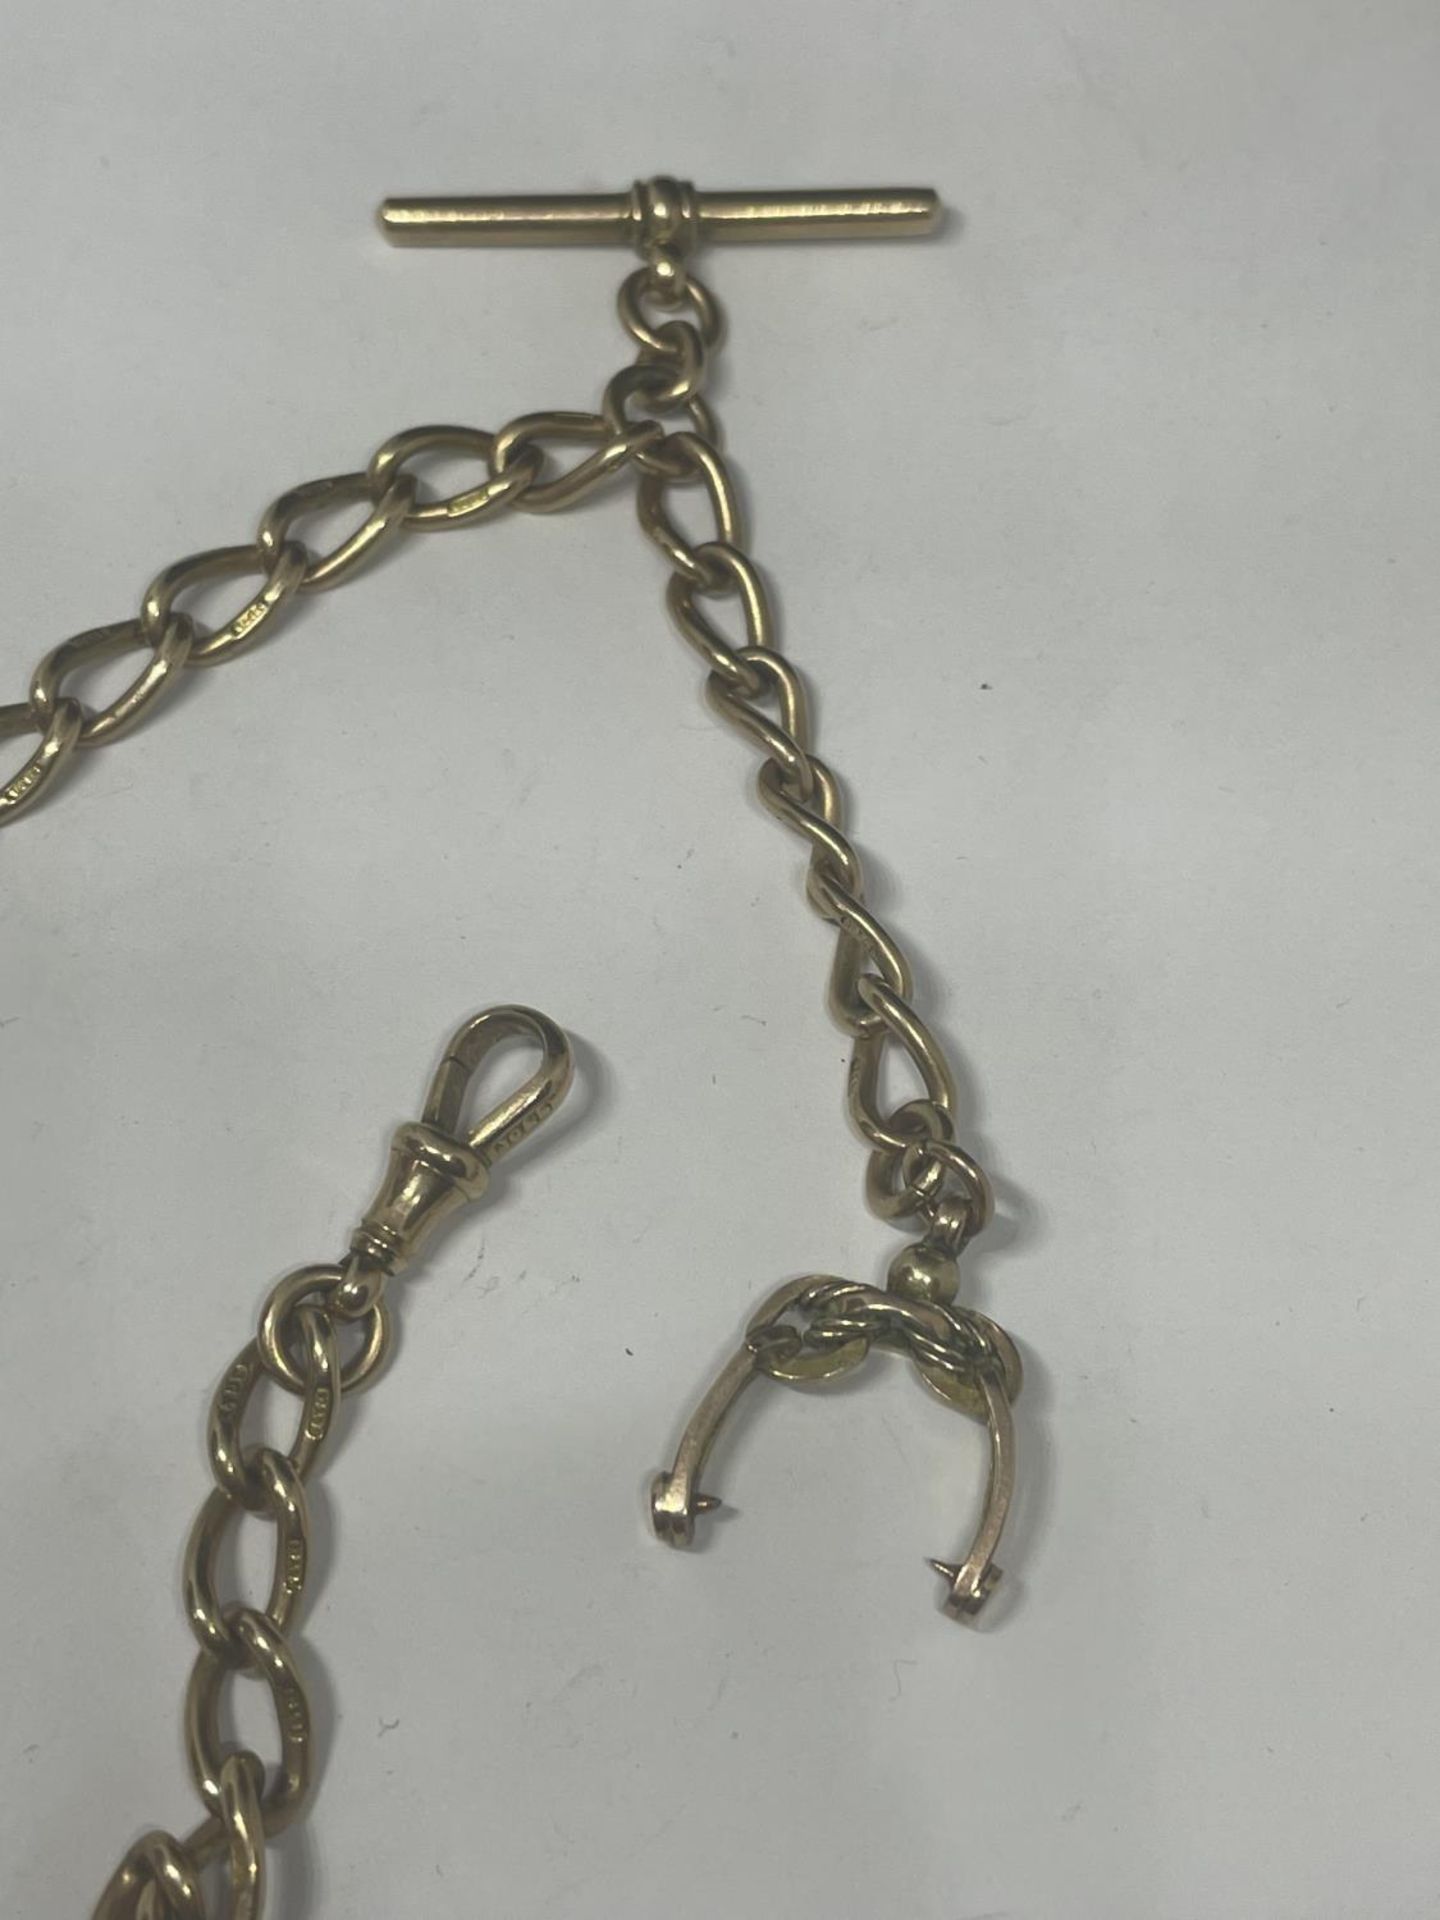 A 9 CARAT GOLD WATCH CHAIN WITH T BAR GROSS WEIGHT 35.5 GRAMS - Image 3 of 3